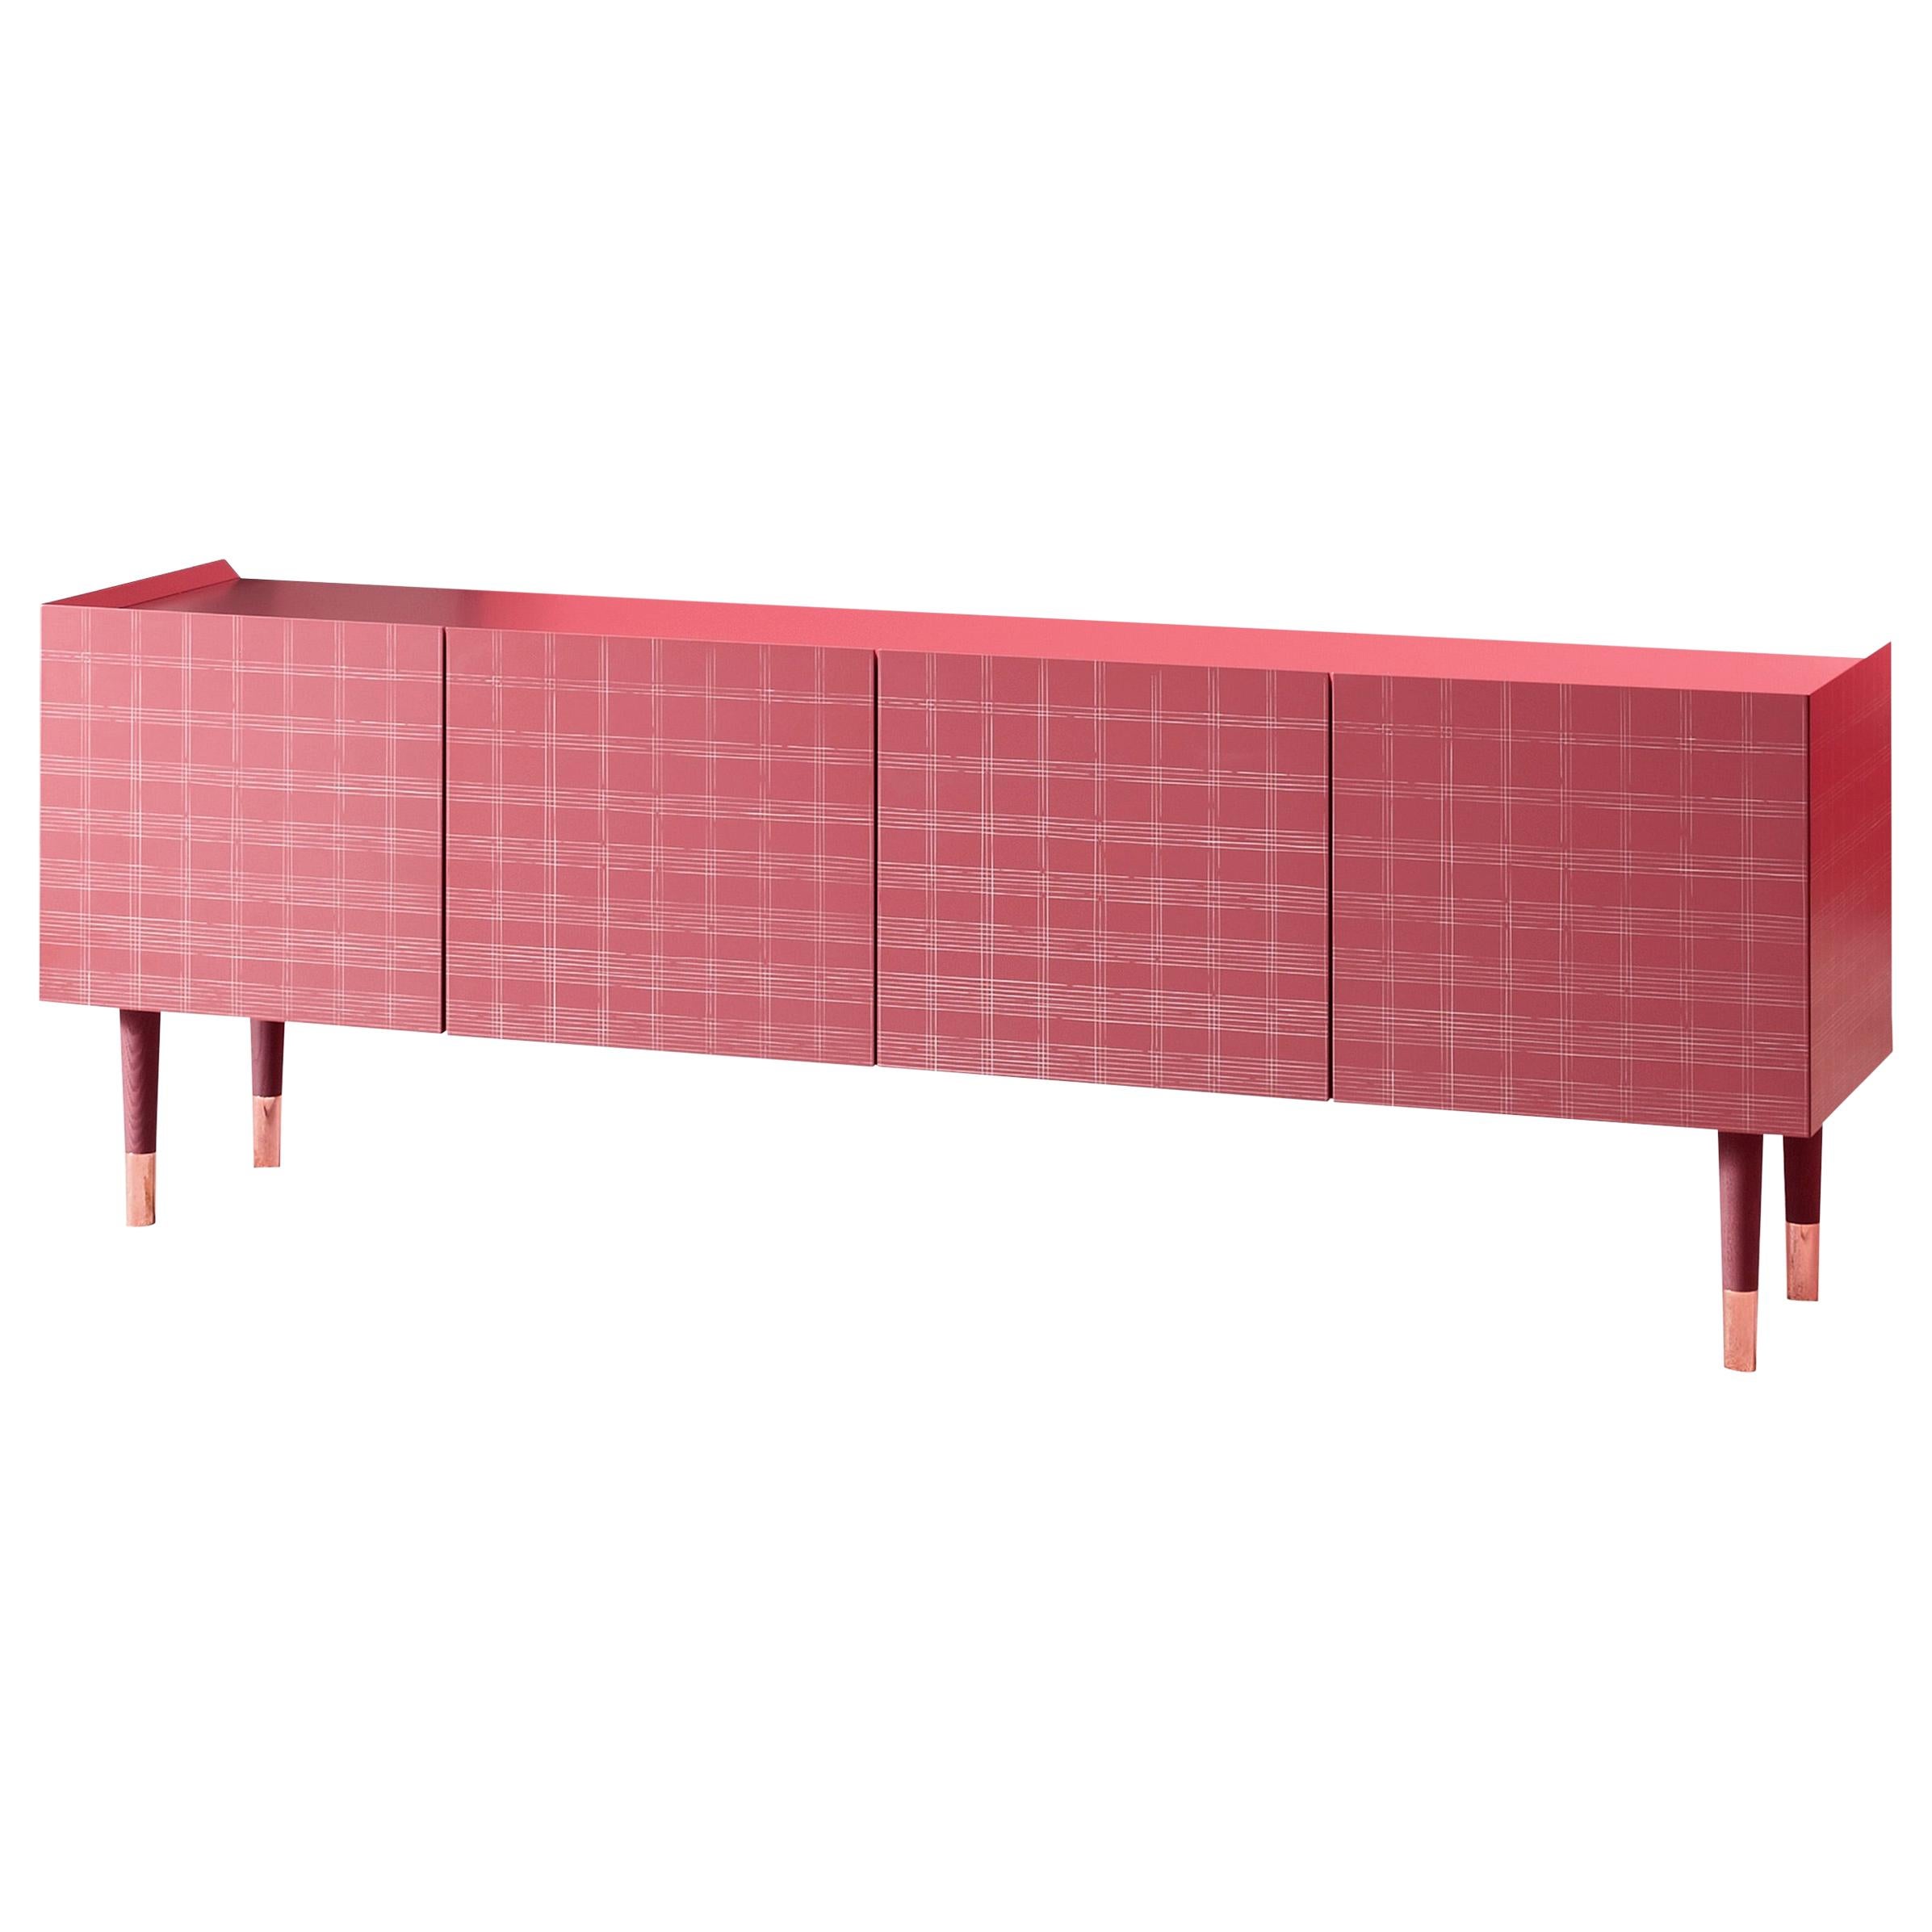 Stoya 4-Door Cabinet with Lacquer and Aniline Legs, by E-GGS